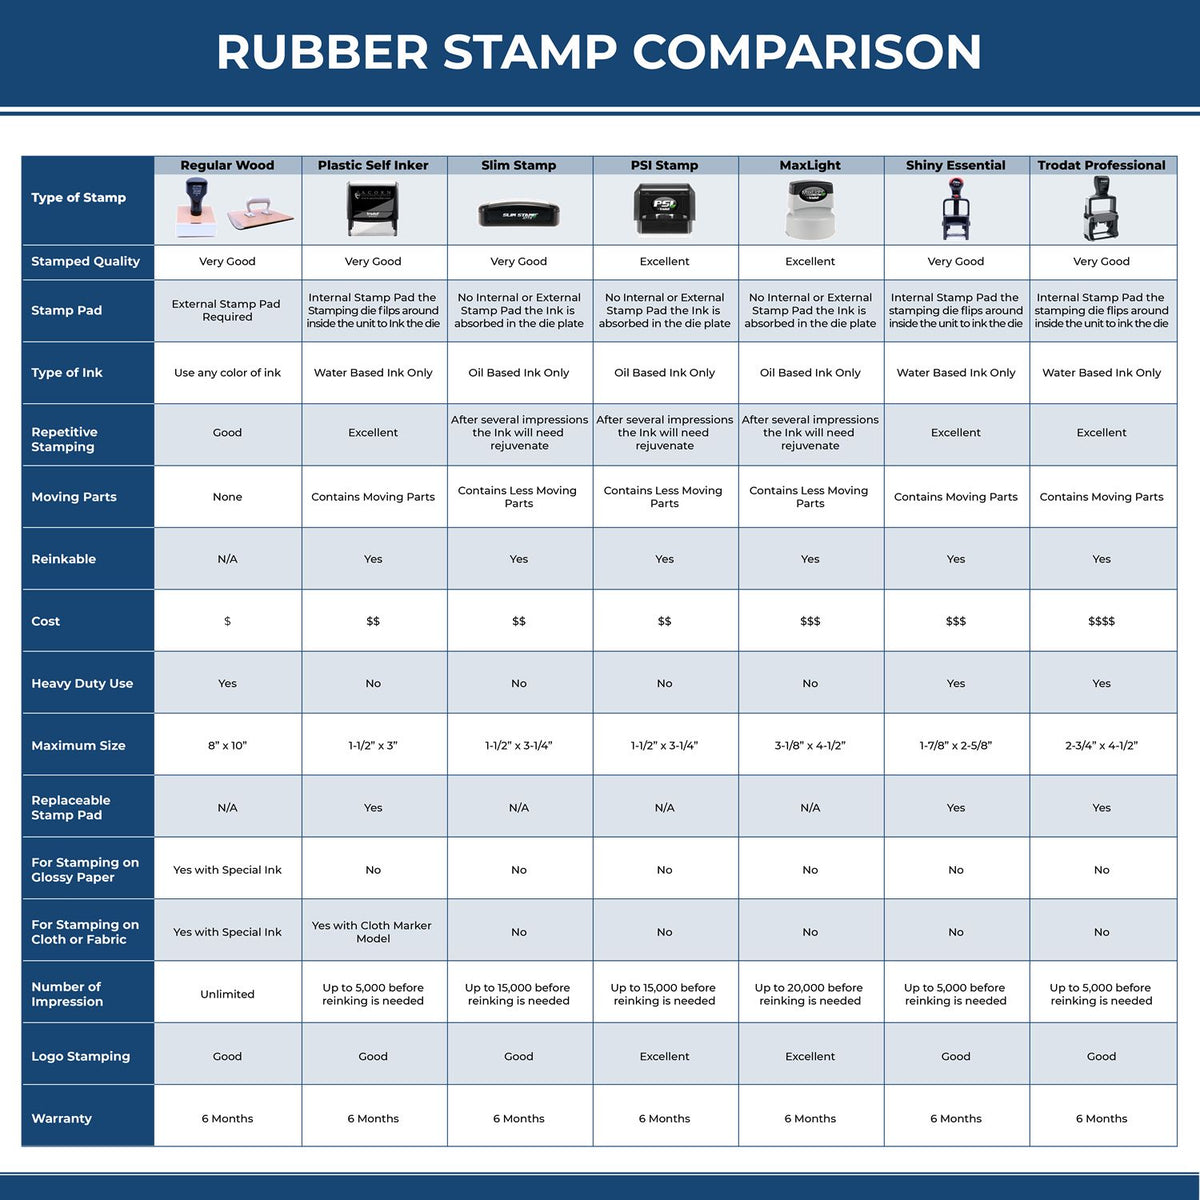 A comparison chart for the different types of mount models available for the Premium MaxLight Pre-Inked Texas Landscape Architectural Stamp.